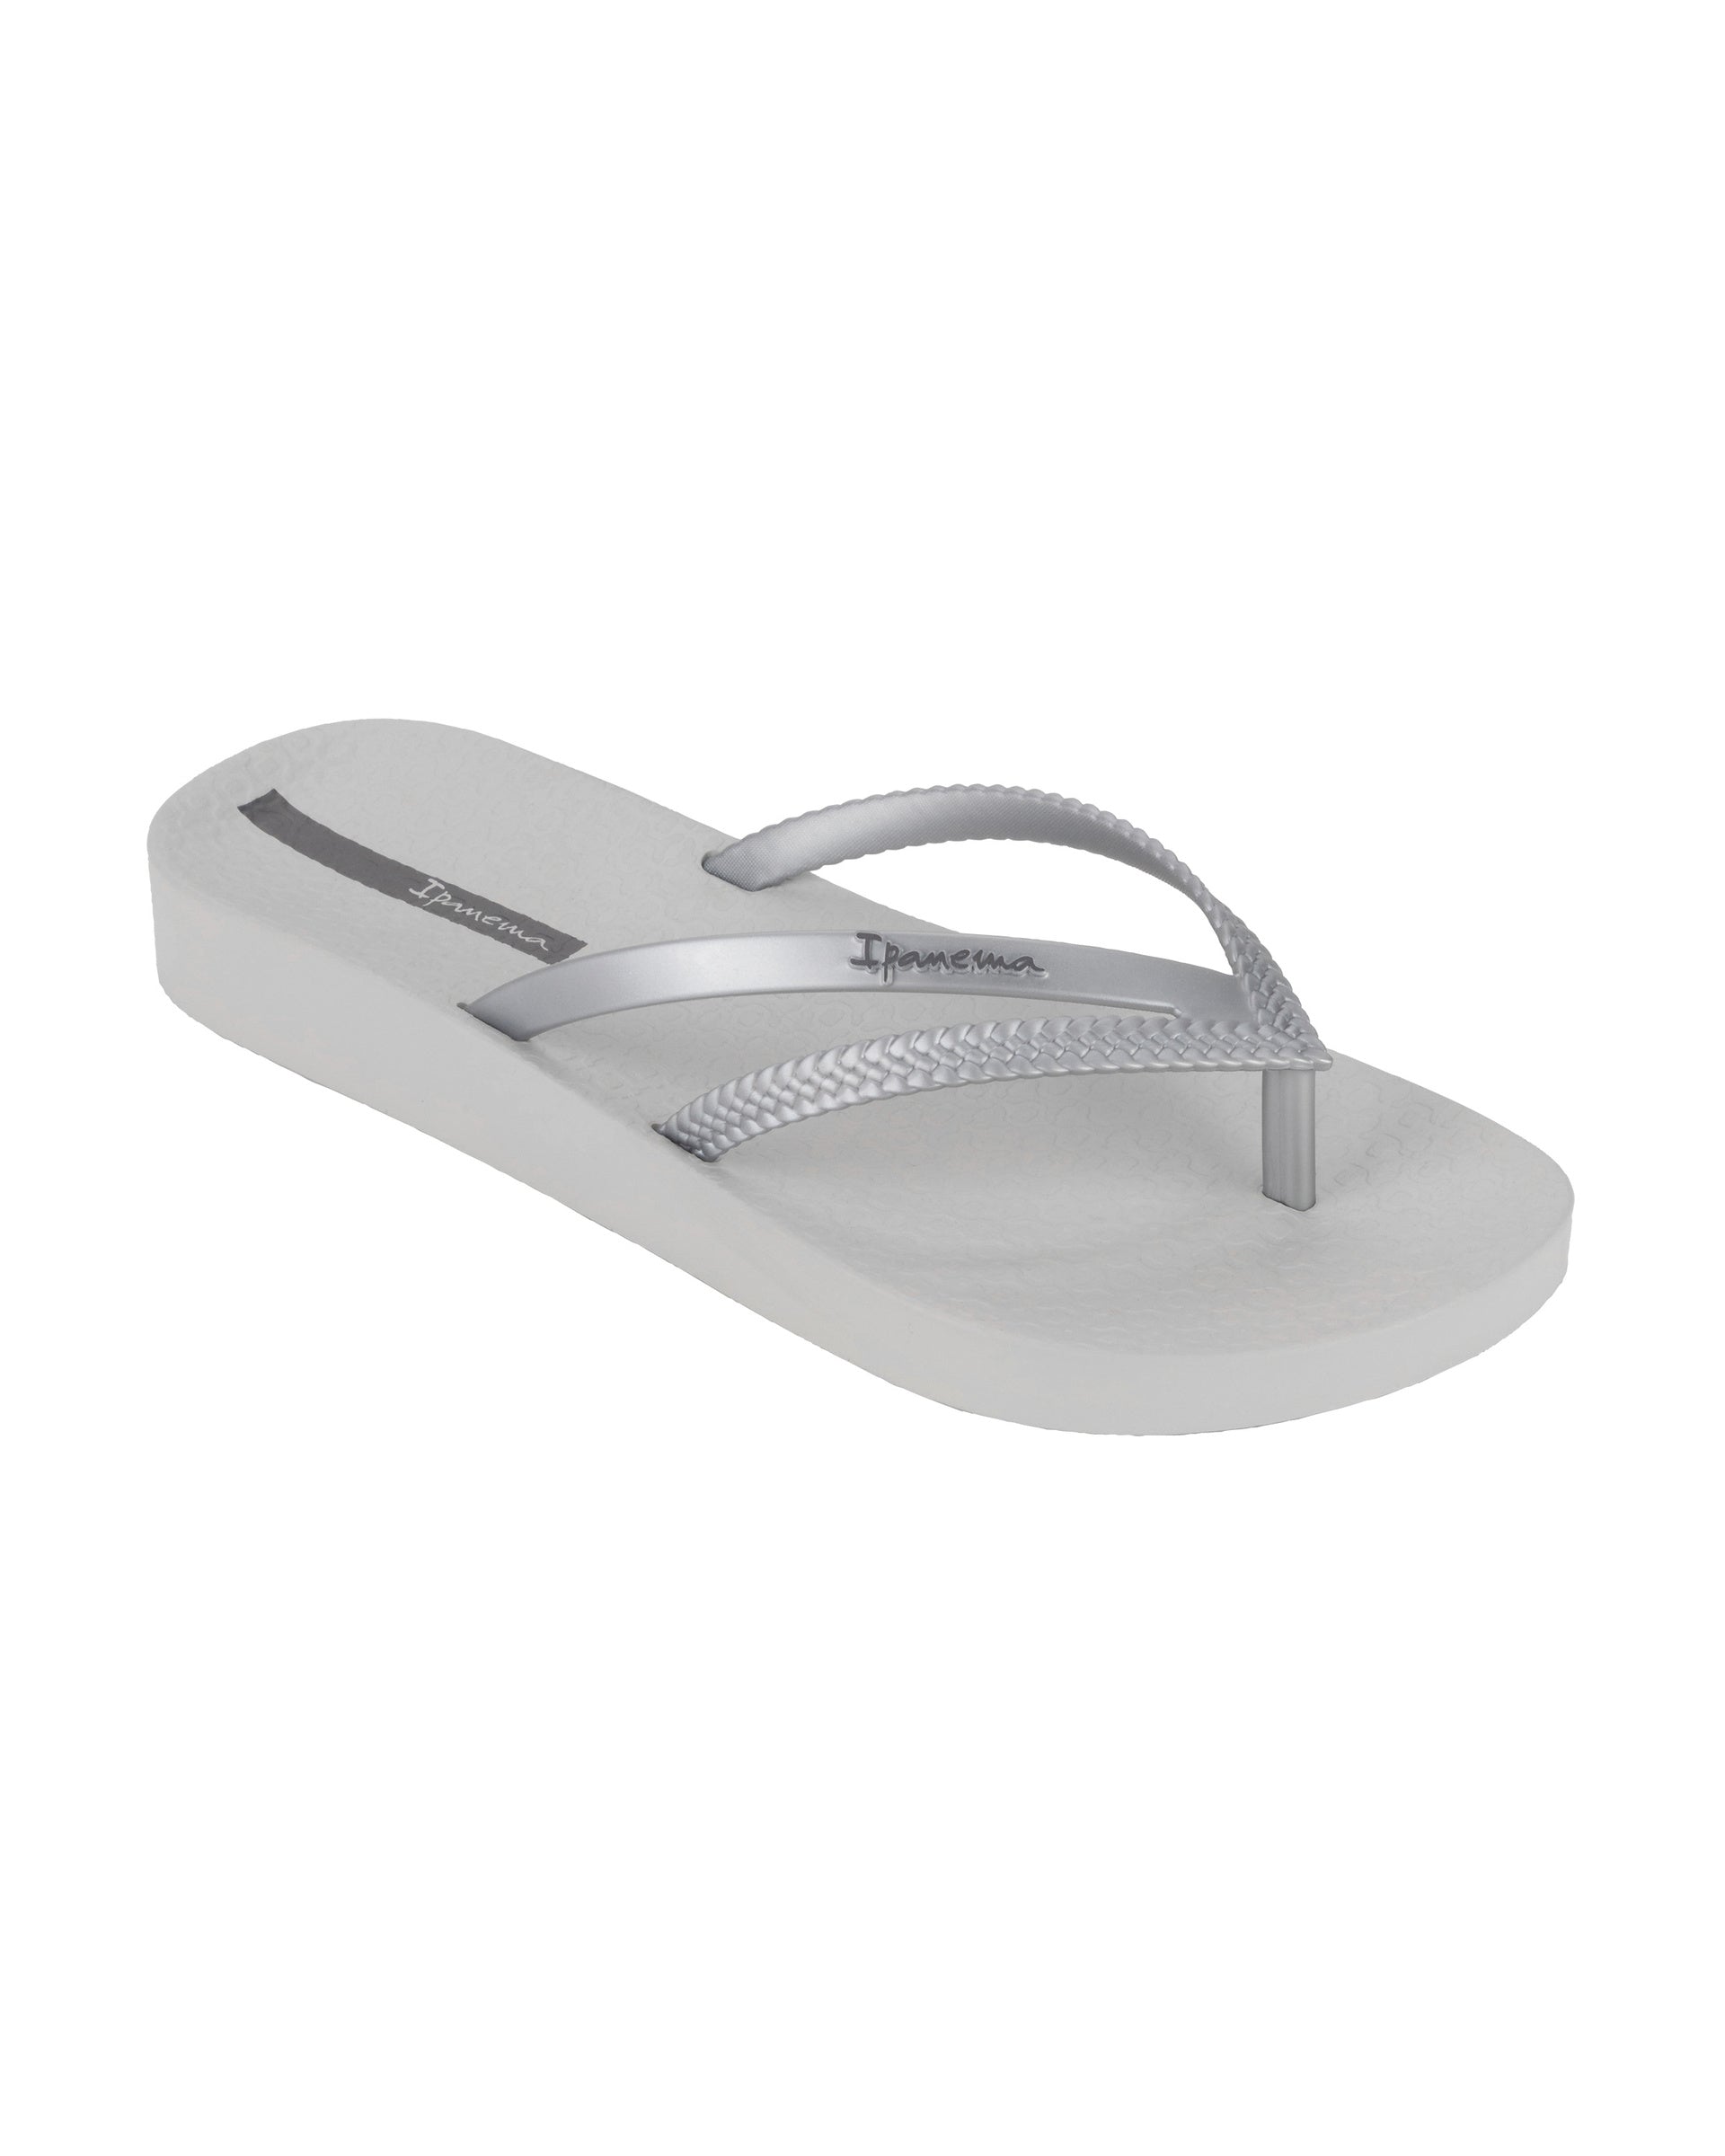 Angled view of a grey Ipanema Bossa Soft women's flip flop with metallic grey straps.